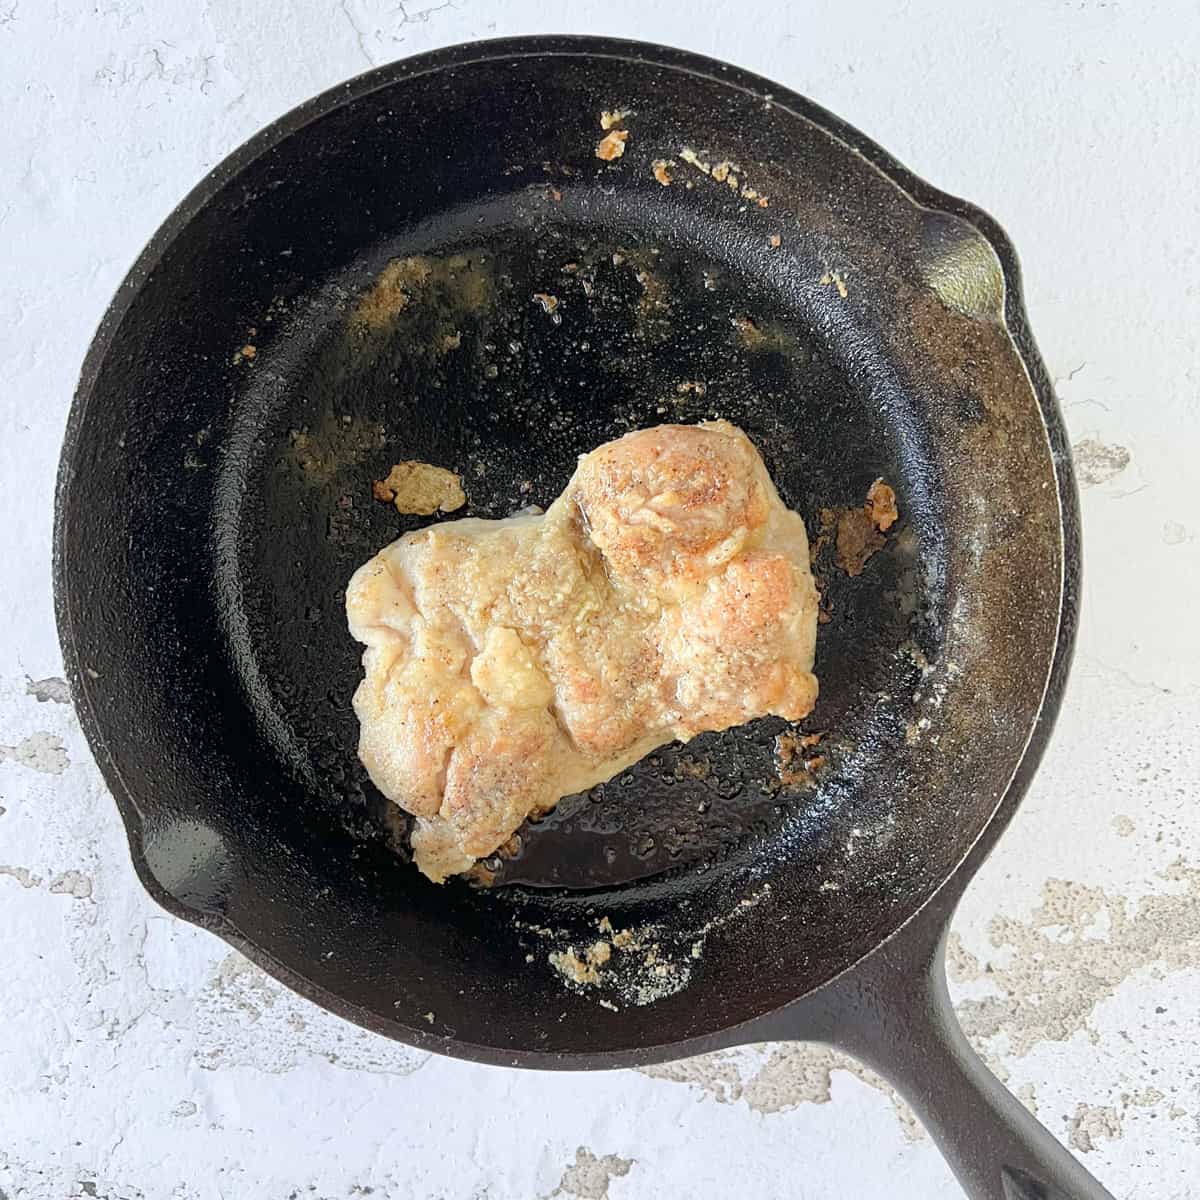 Chciken thigh browning in small cast iron skillet.